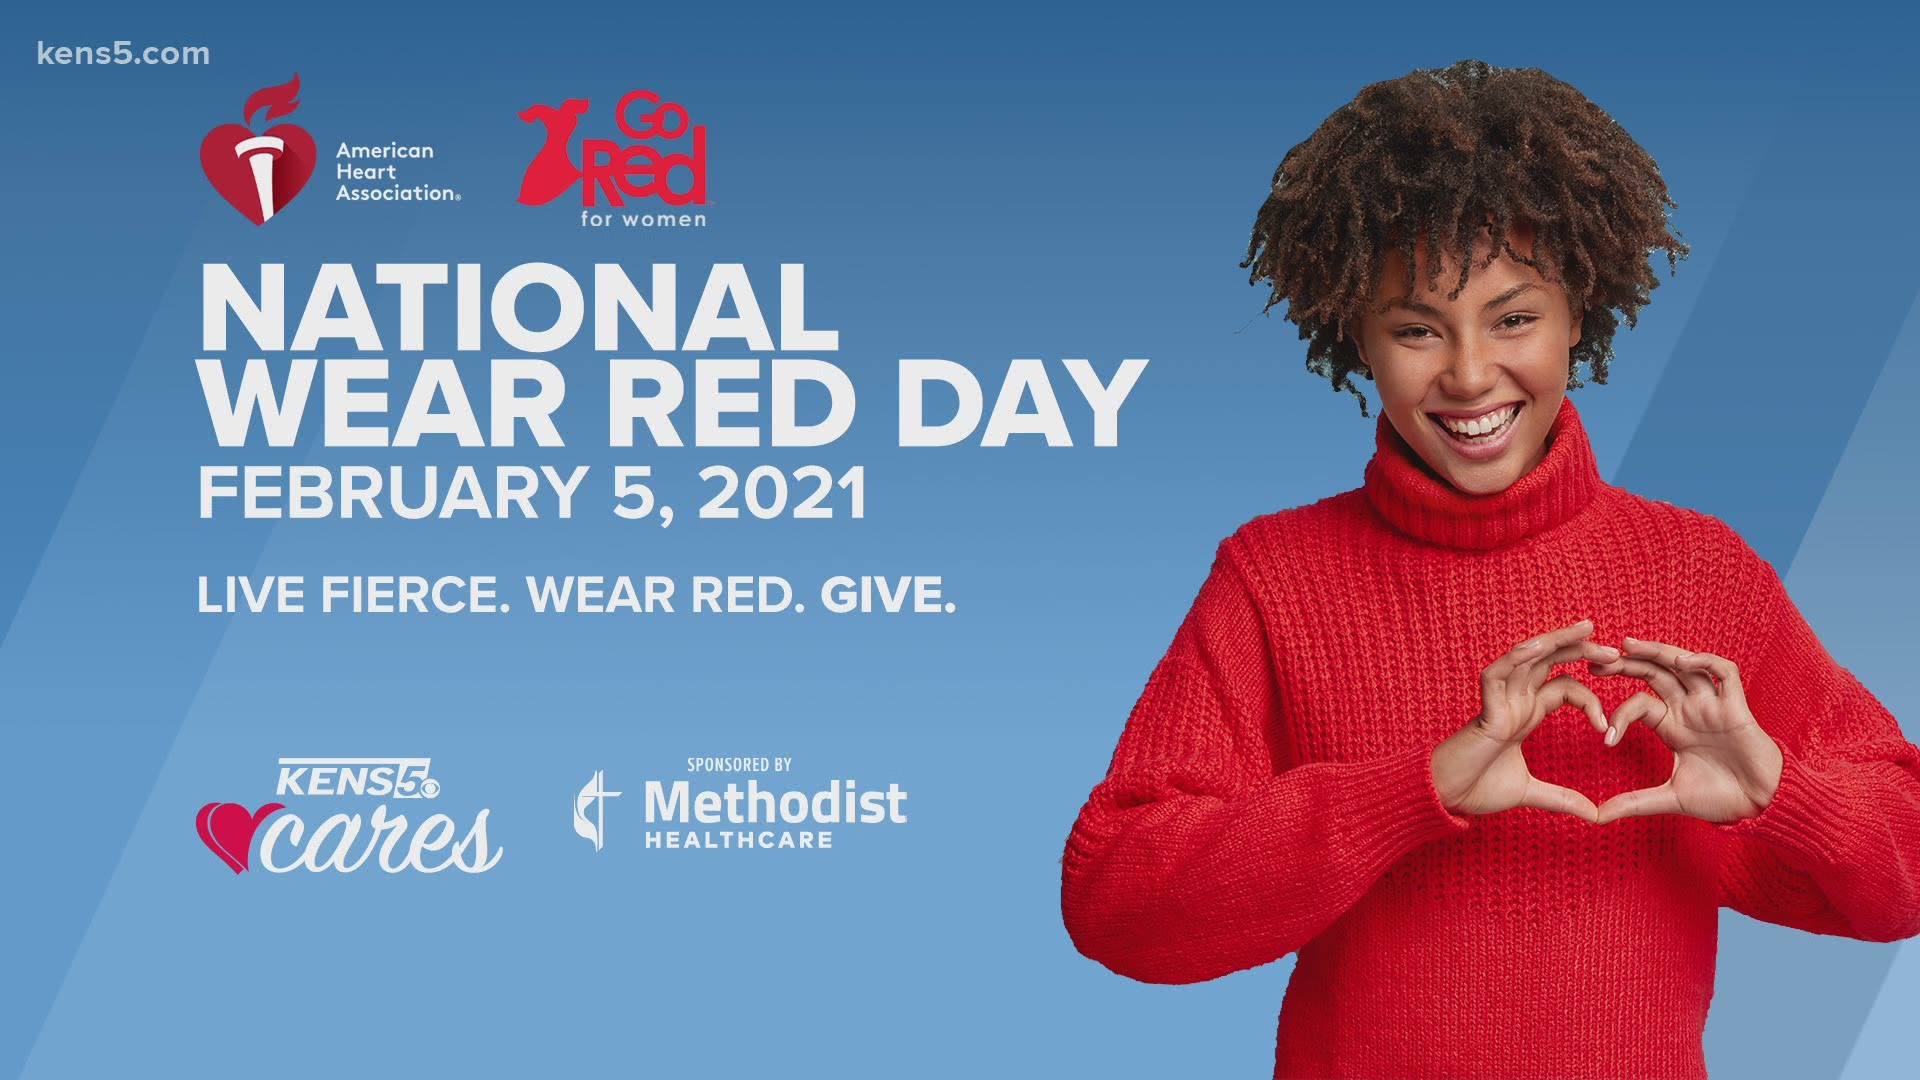 What are you wearing for National Wear Red day?